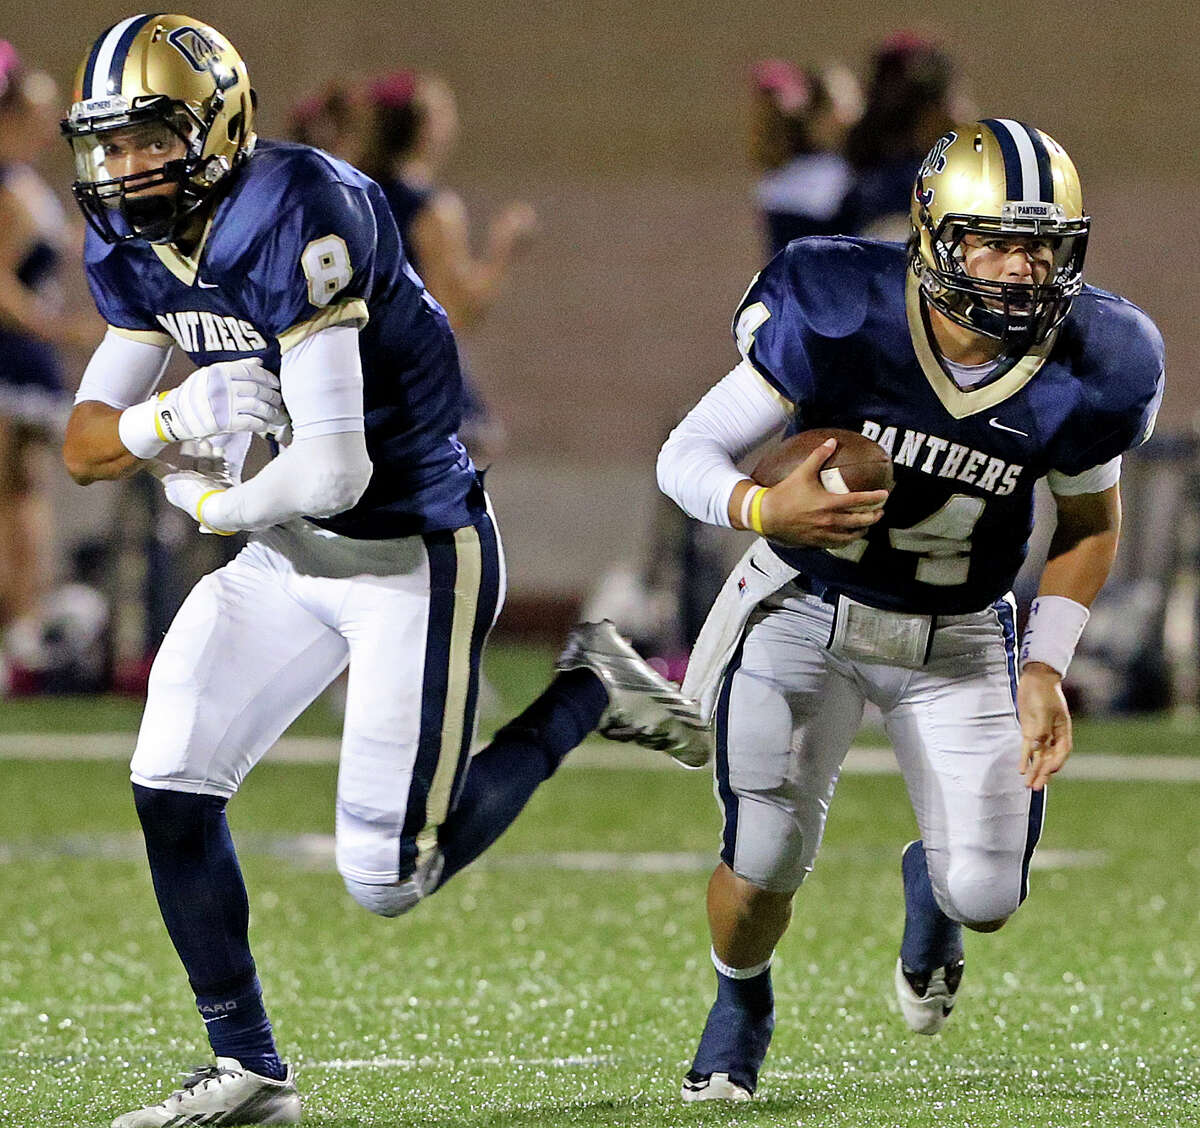 O'Connor quarterback Zach Galindo takes off with the ball after faking to Alonso Roscoe as Warren plays O'Connor at Farris Stadium on October 18, 2013.